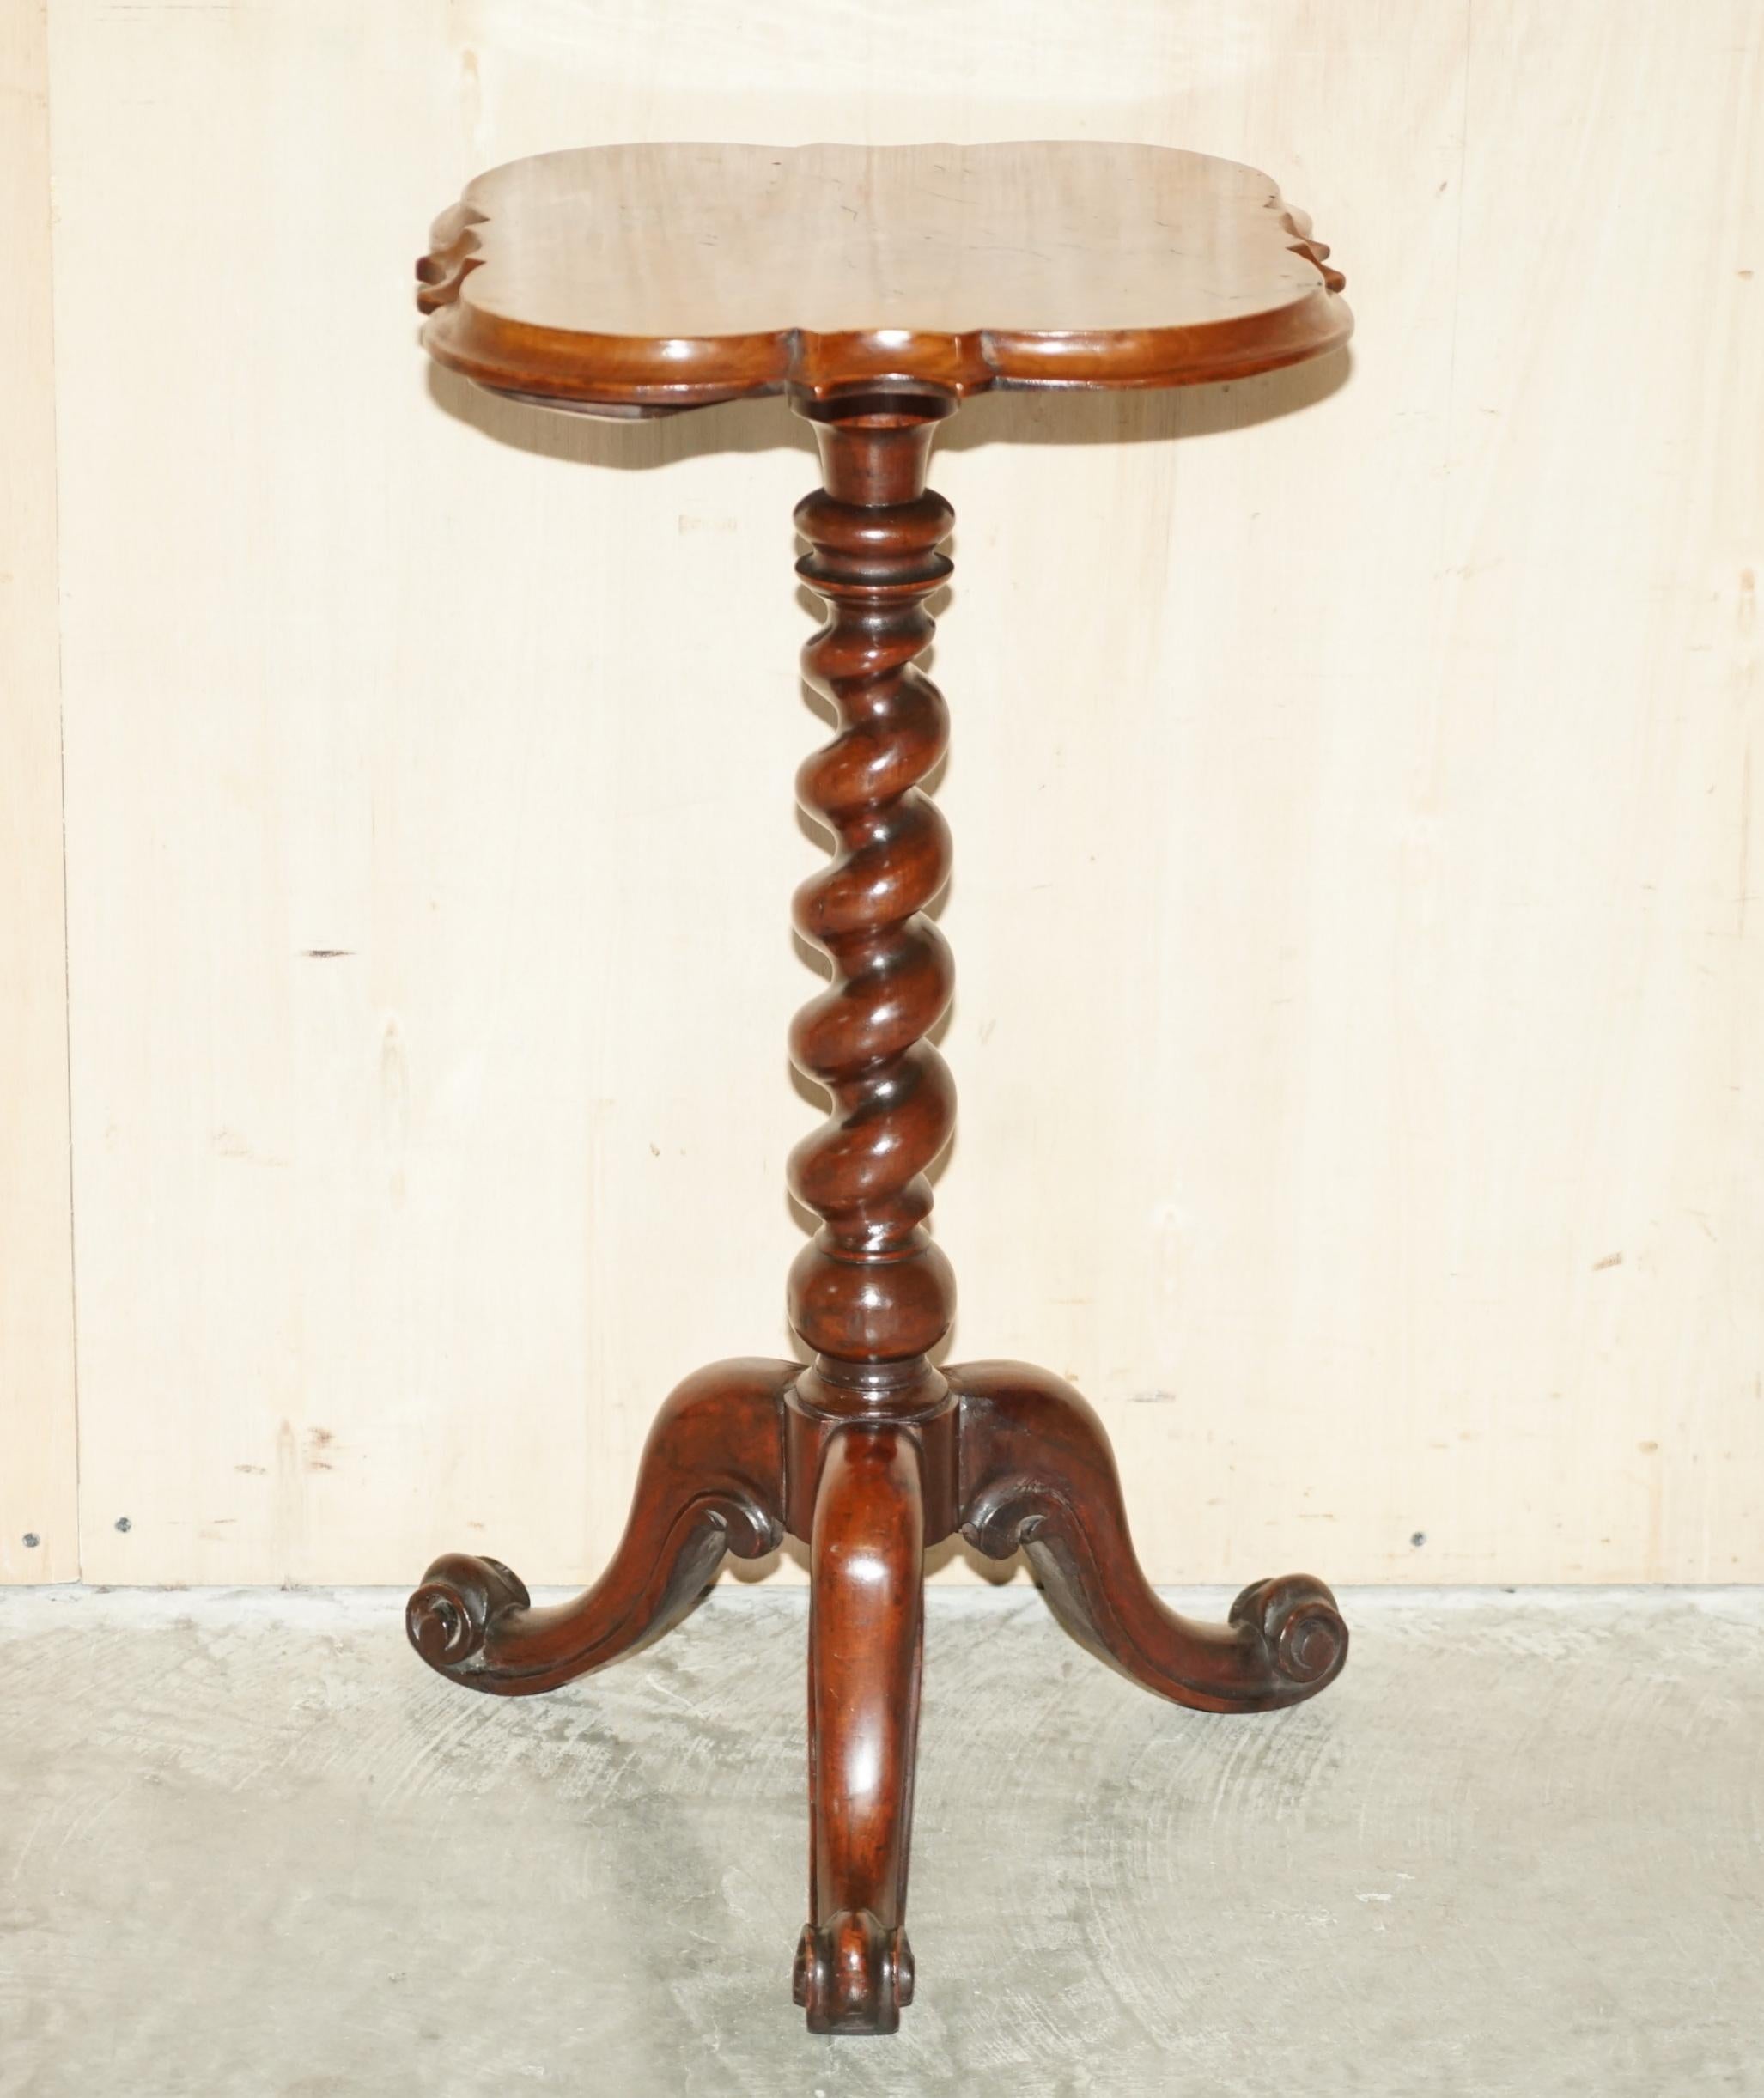 We are delighted to offer for sale this sublime pair of fully restored Victorian circa 1860 Burr Walnut tripod tables with ornately turned barley twist column bases 

A glorious pair of table with exquisite burr walnut tops, these tops sit diamond